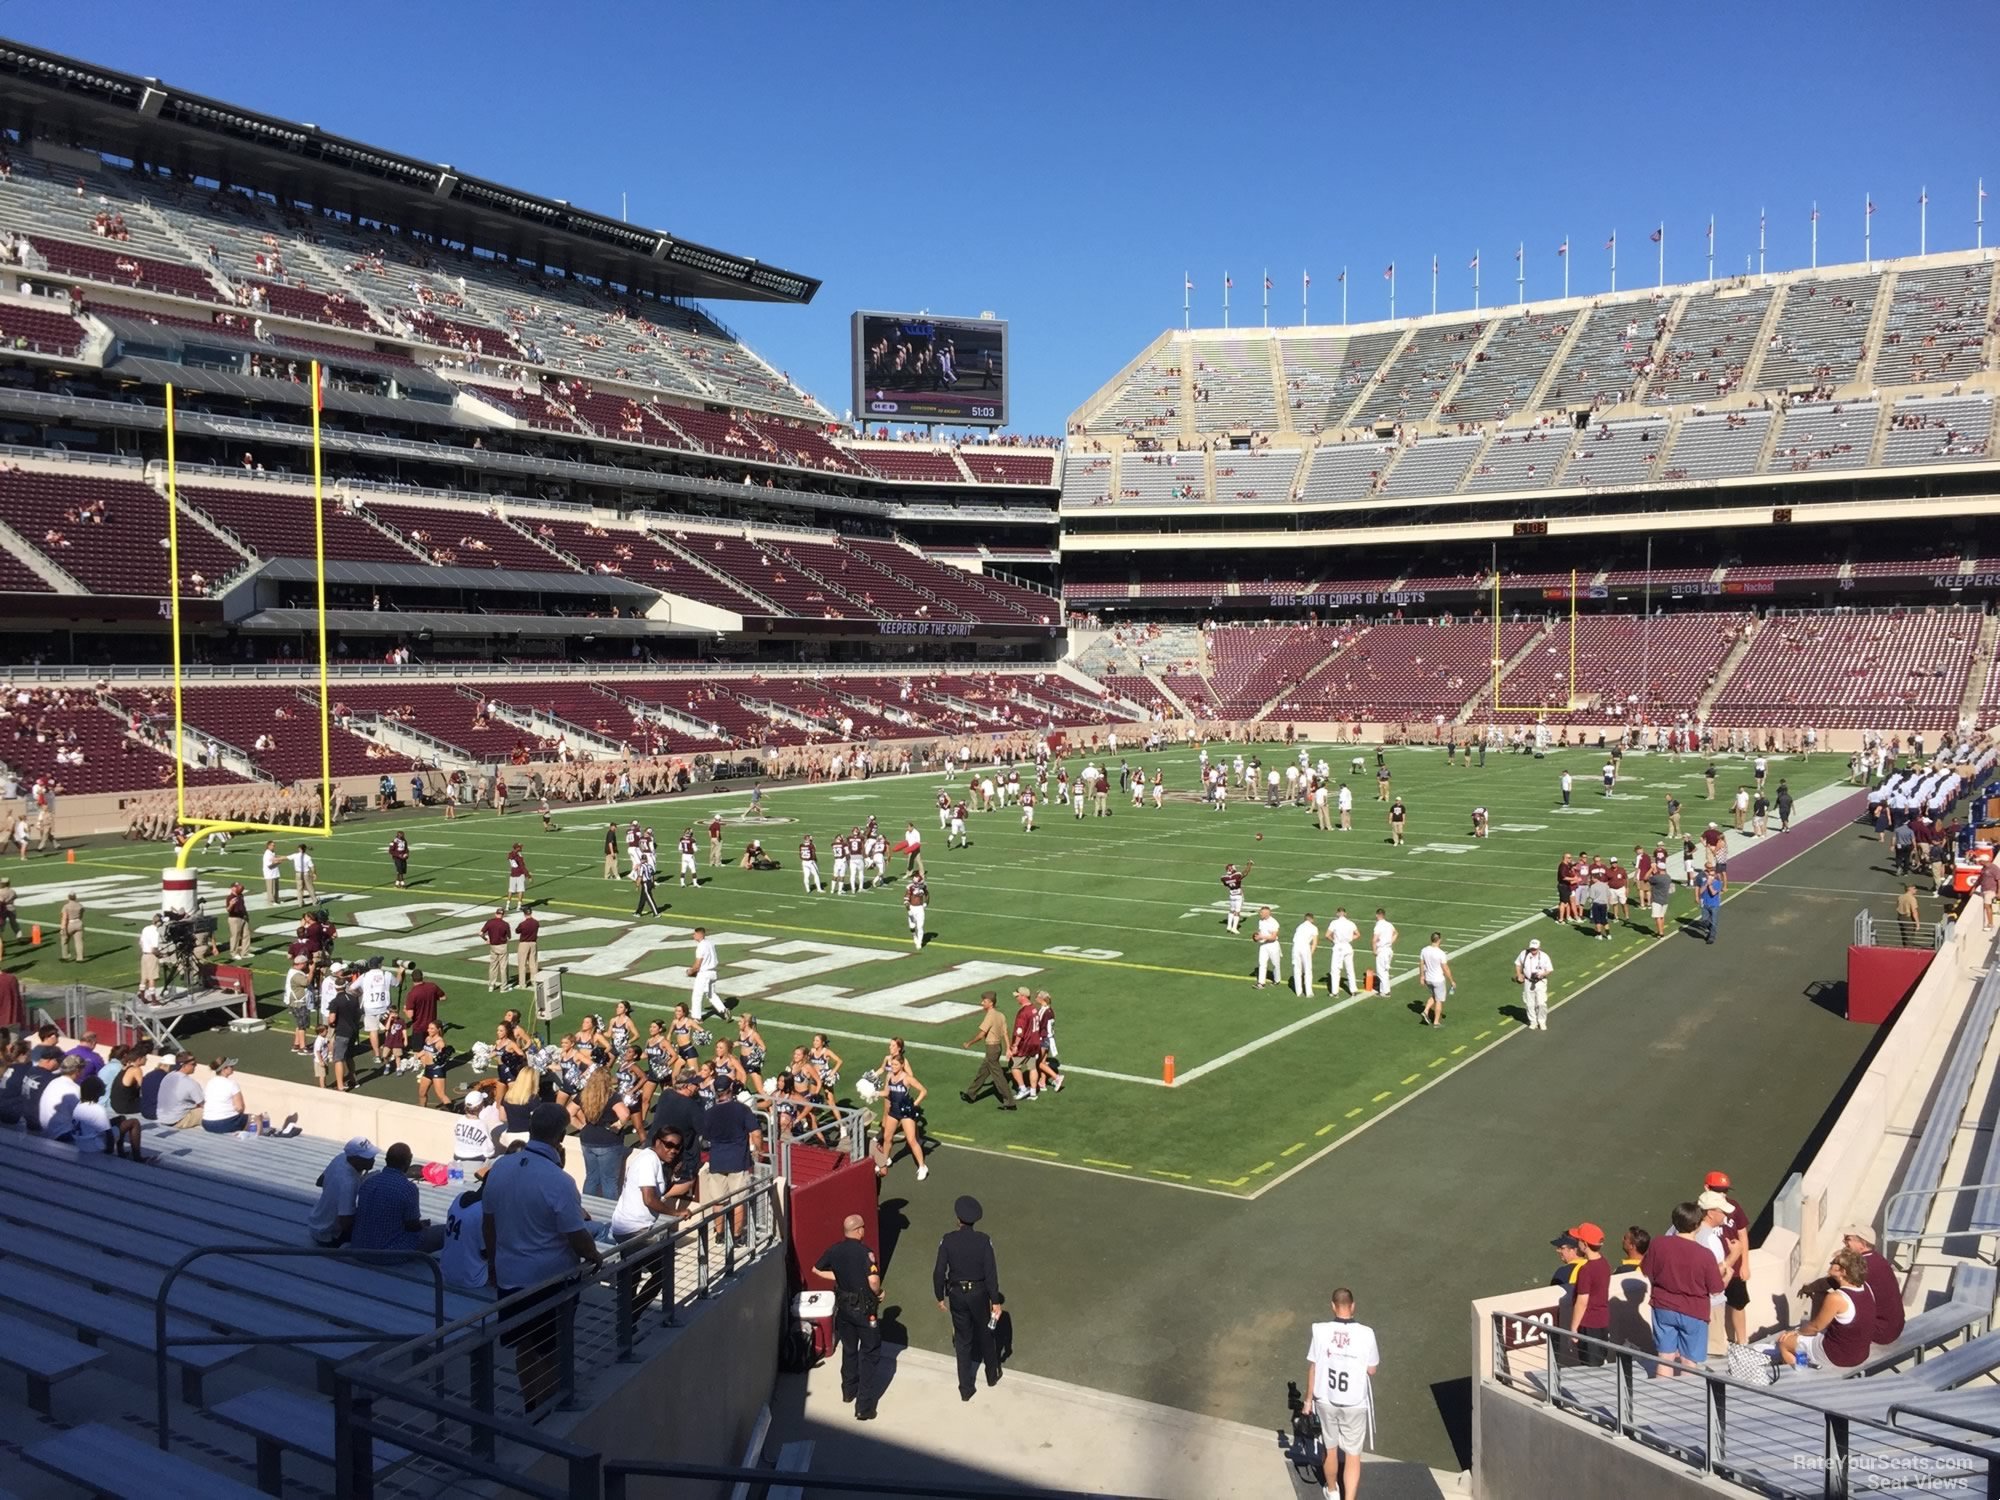 section 130, row 20 seat view  - kyle field